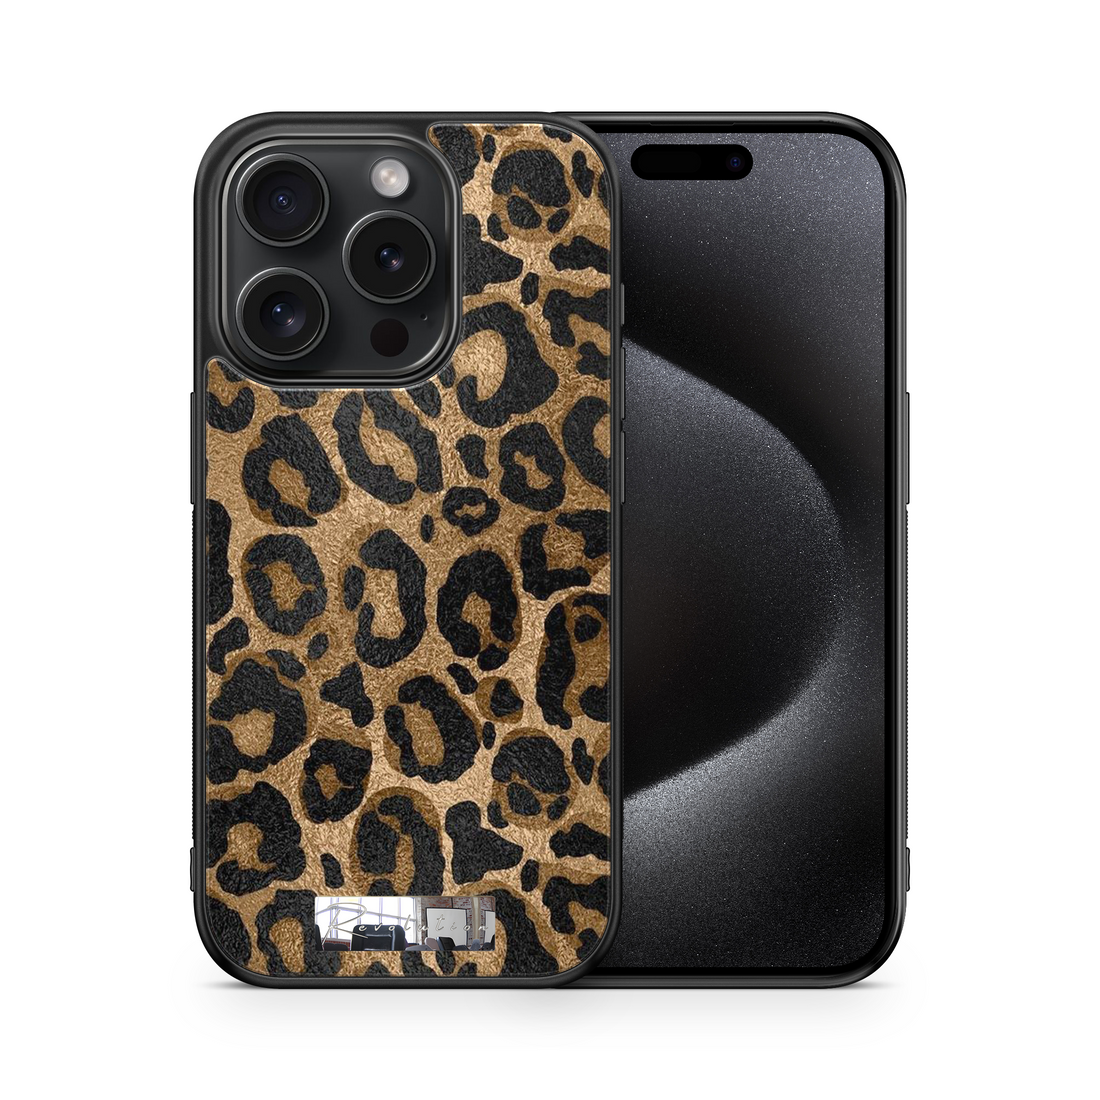 COVER LEOPARD